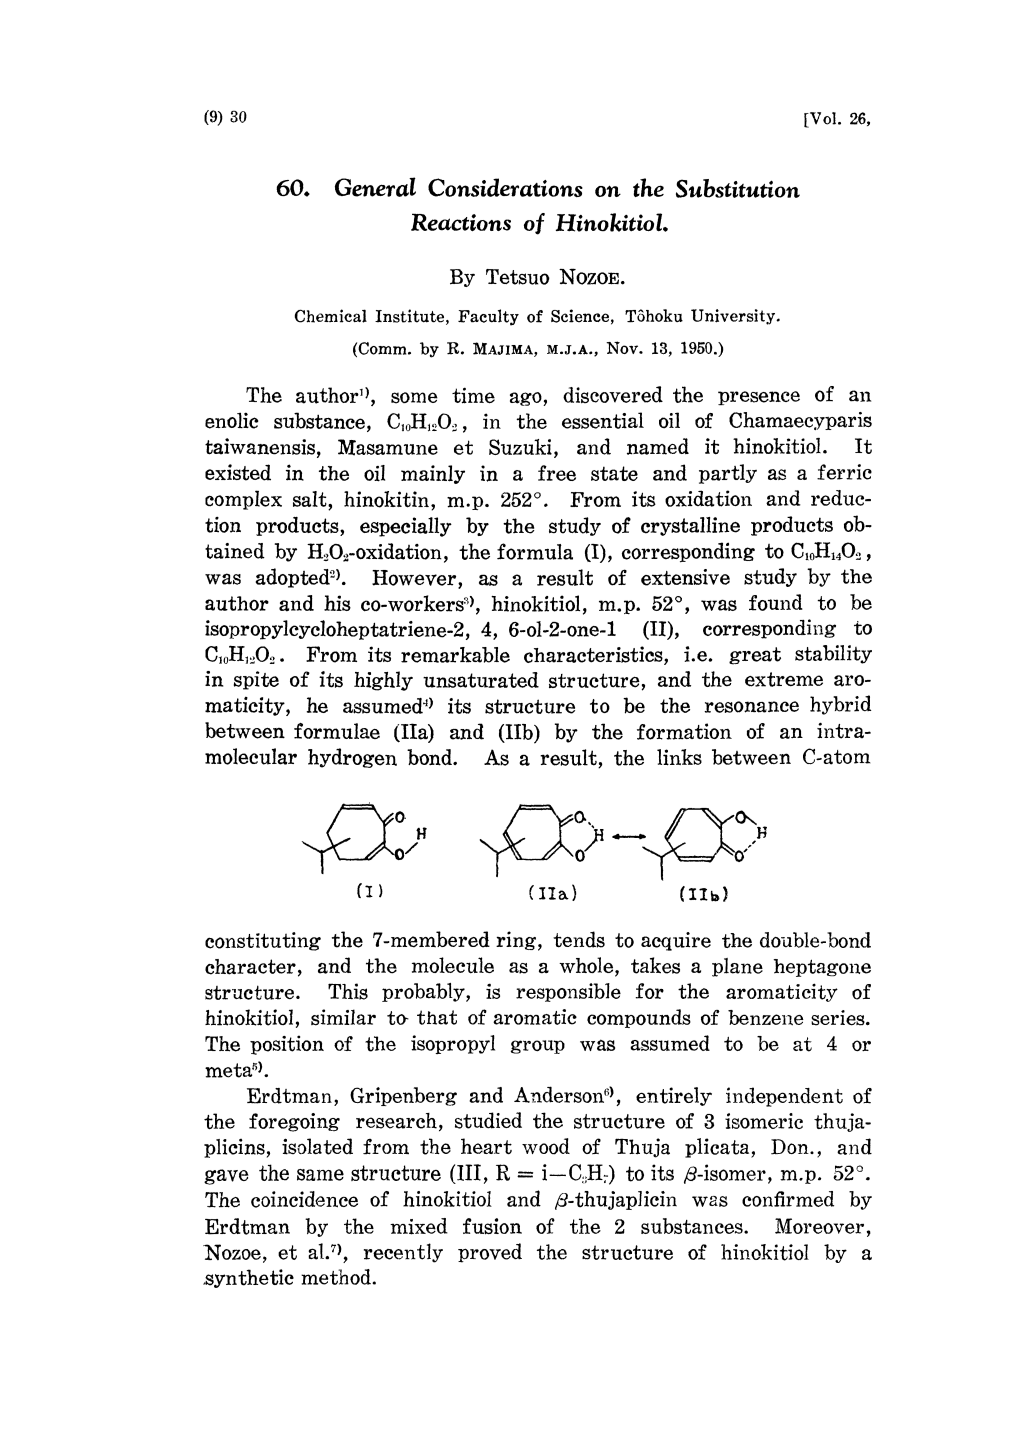 60. General Considerations on the Substitution Reactions O F Hinokitiol